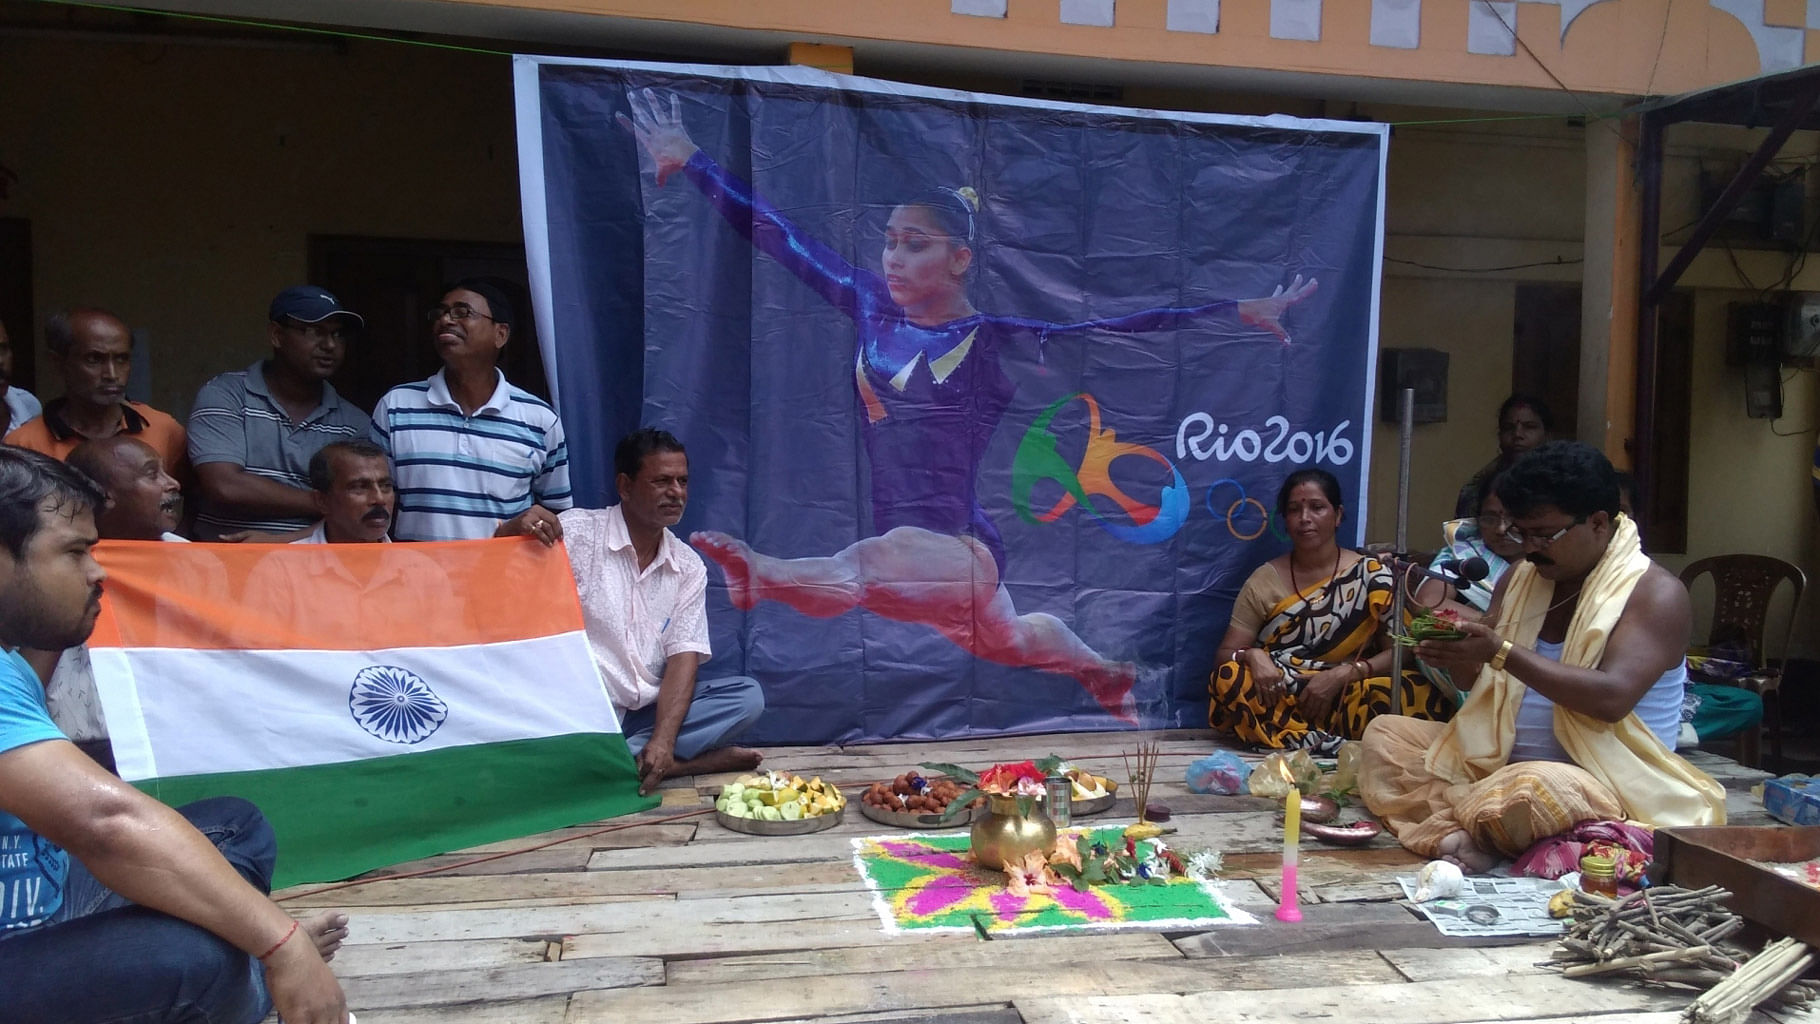 

People offer prayers for Indian gymnast Dipa Karmakar who came fourth in Women’s vault at Rio 2016 Olympics, in Agartala, 14 August, 2016. (Photo: IANS)